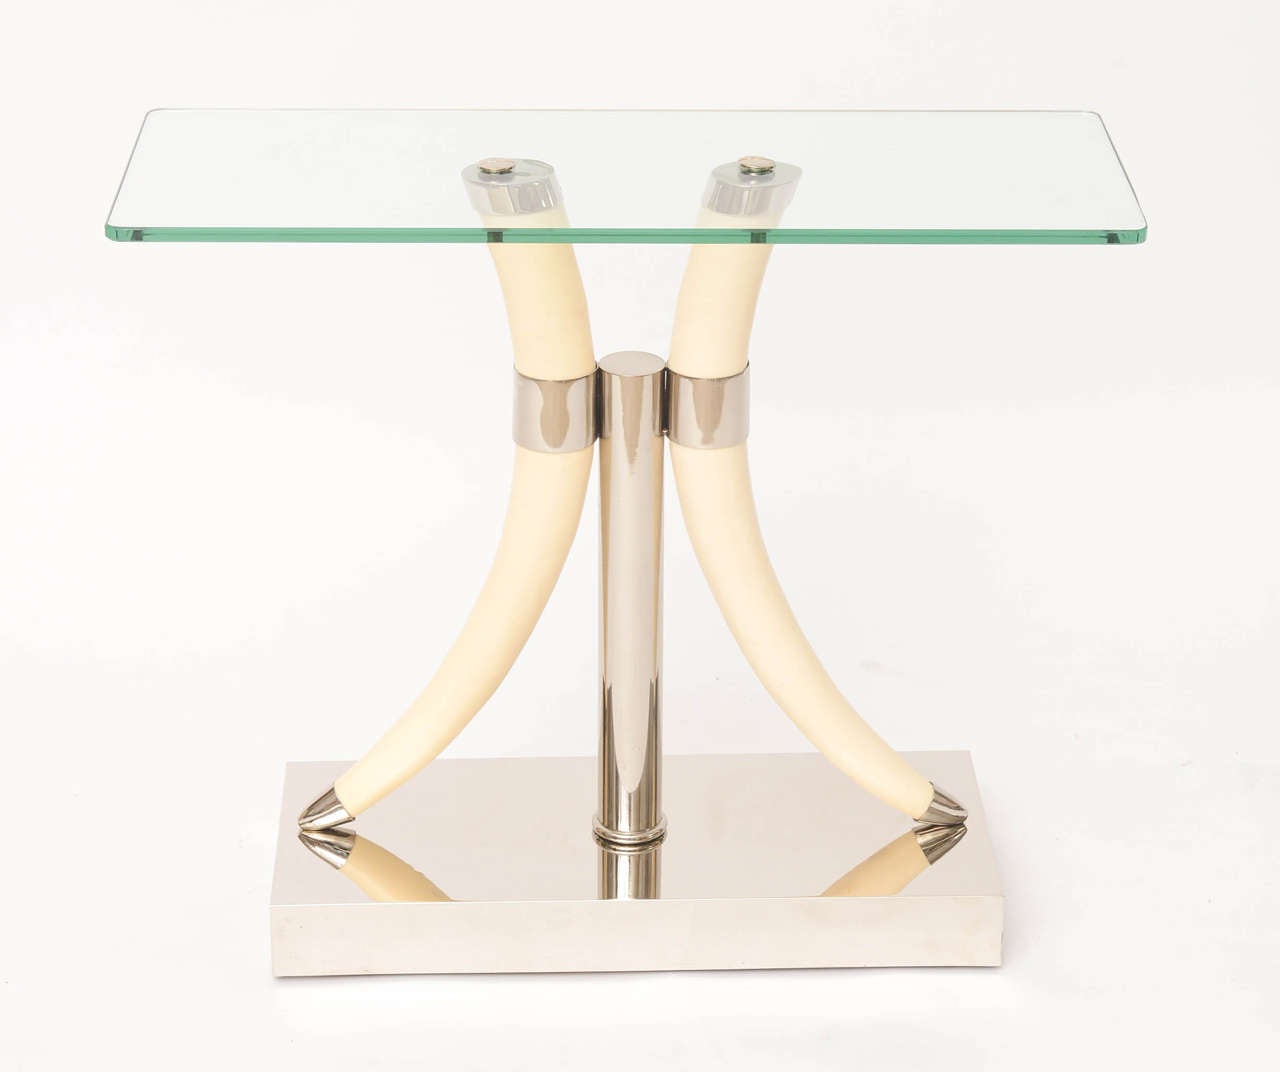 Elegant 1970s nickeled side table with resin tusk supports and glass top.